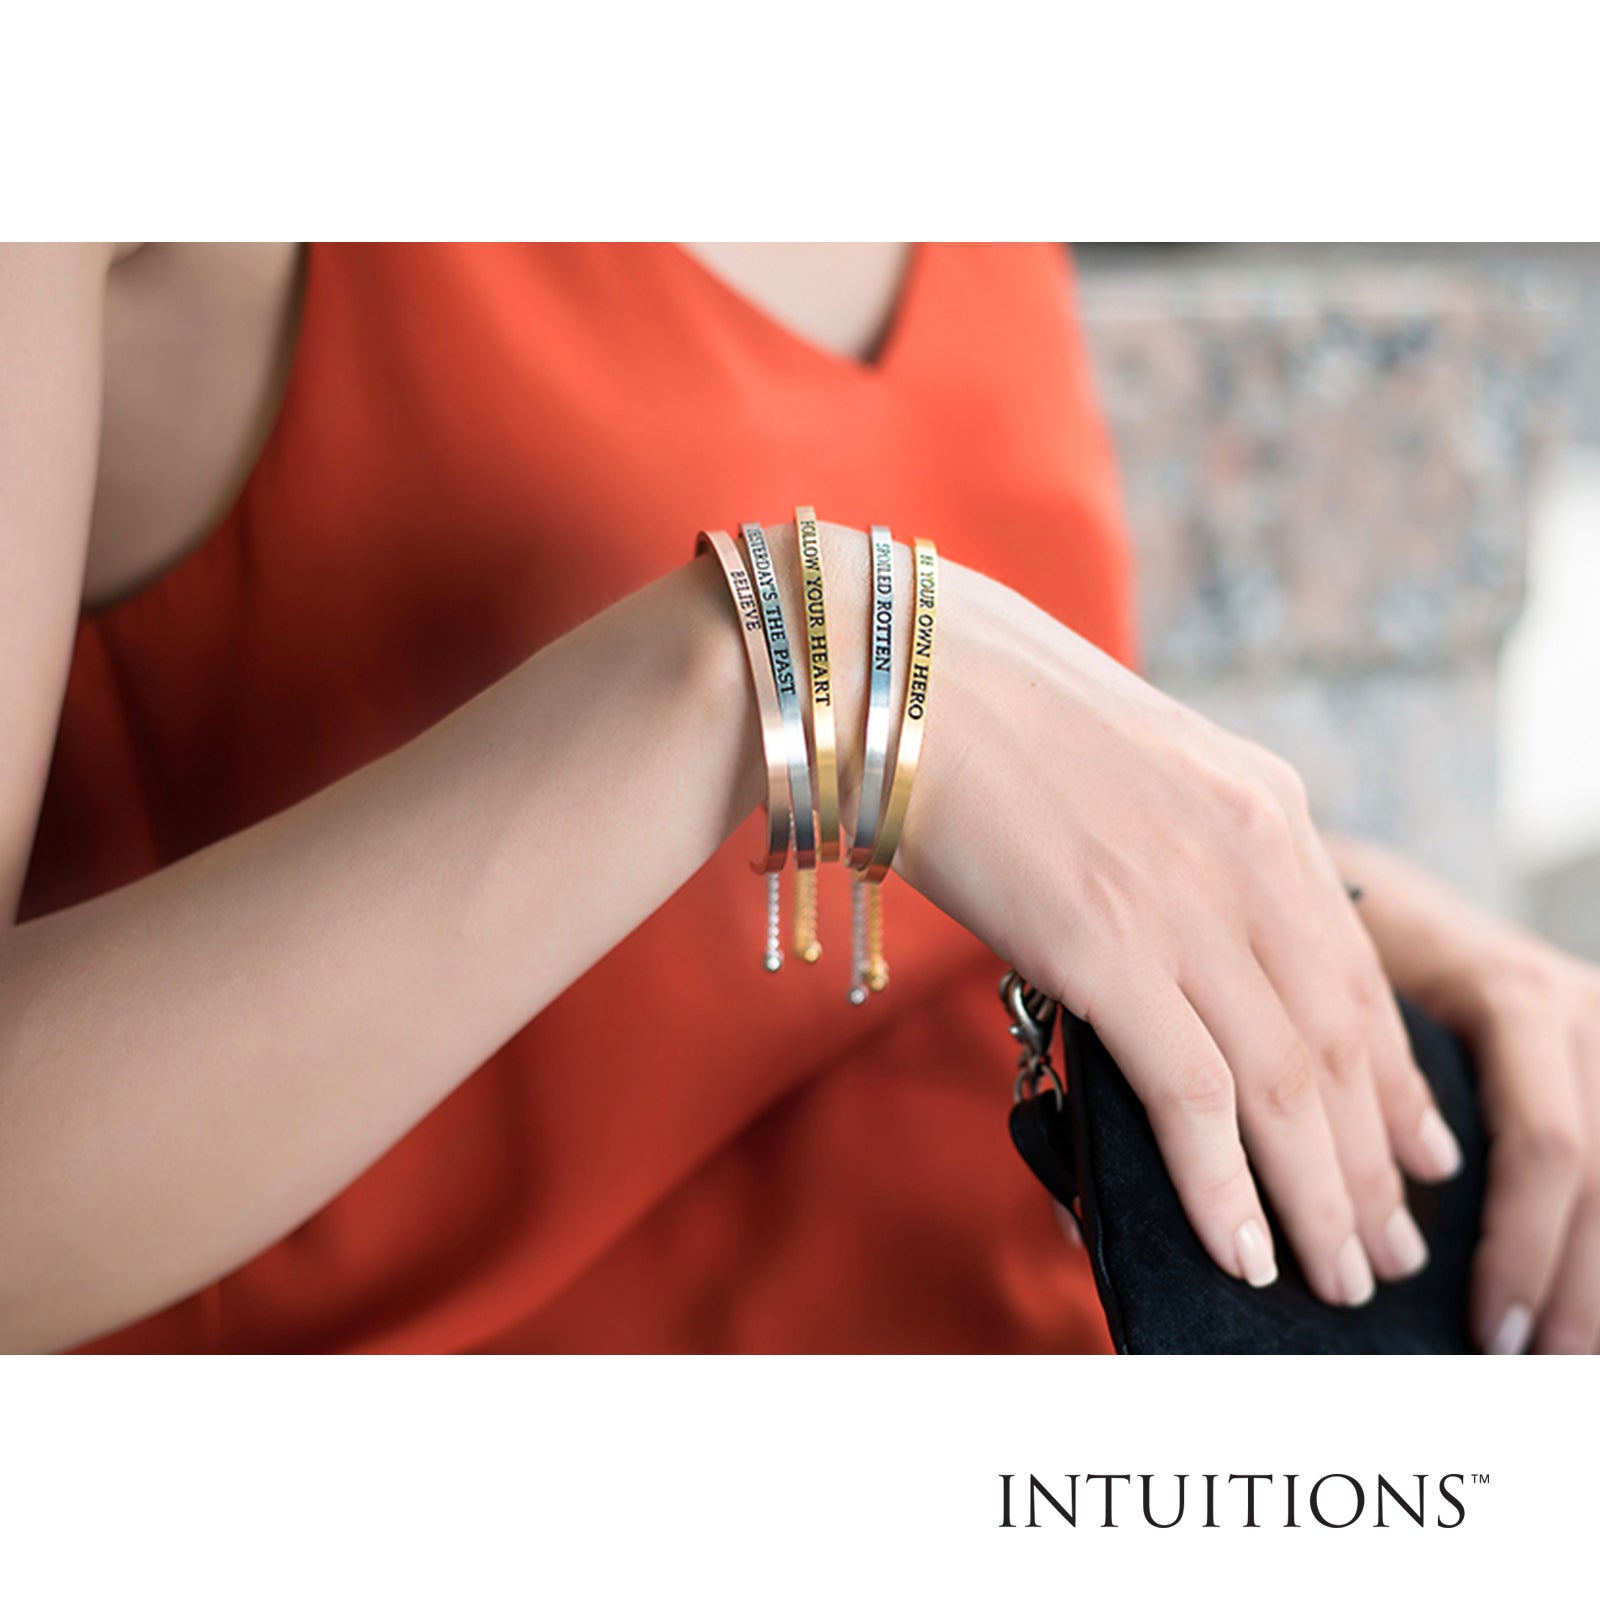 Intuitions Stainless Steel EMBRACE THE MOMENT Diamond Accent Cuff Bangle Bracelet fine designer jewelry for men and women